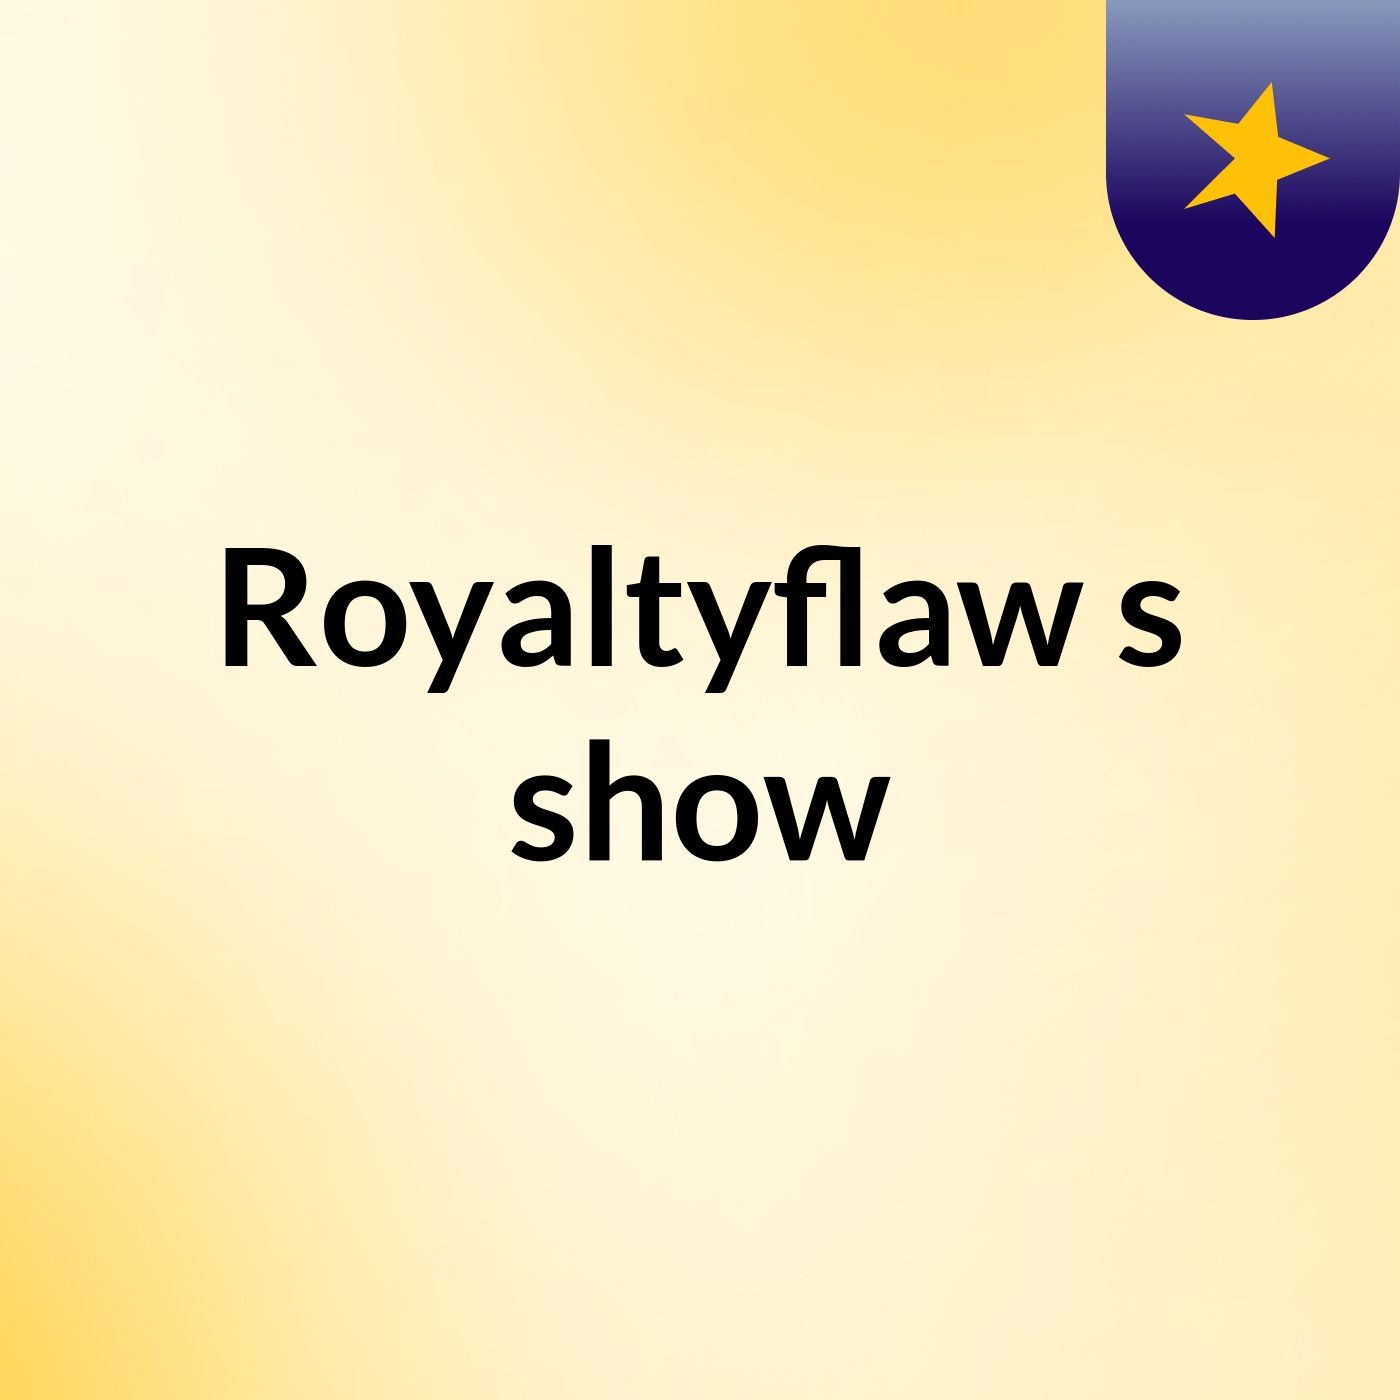 Royaltyflaw's show